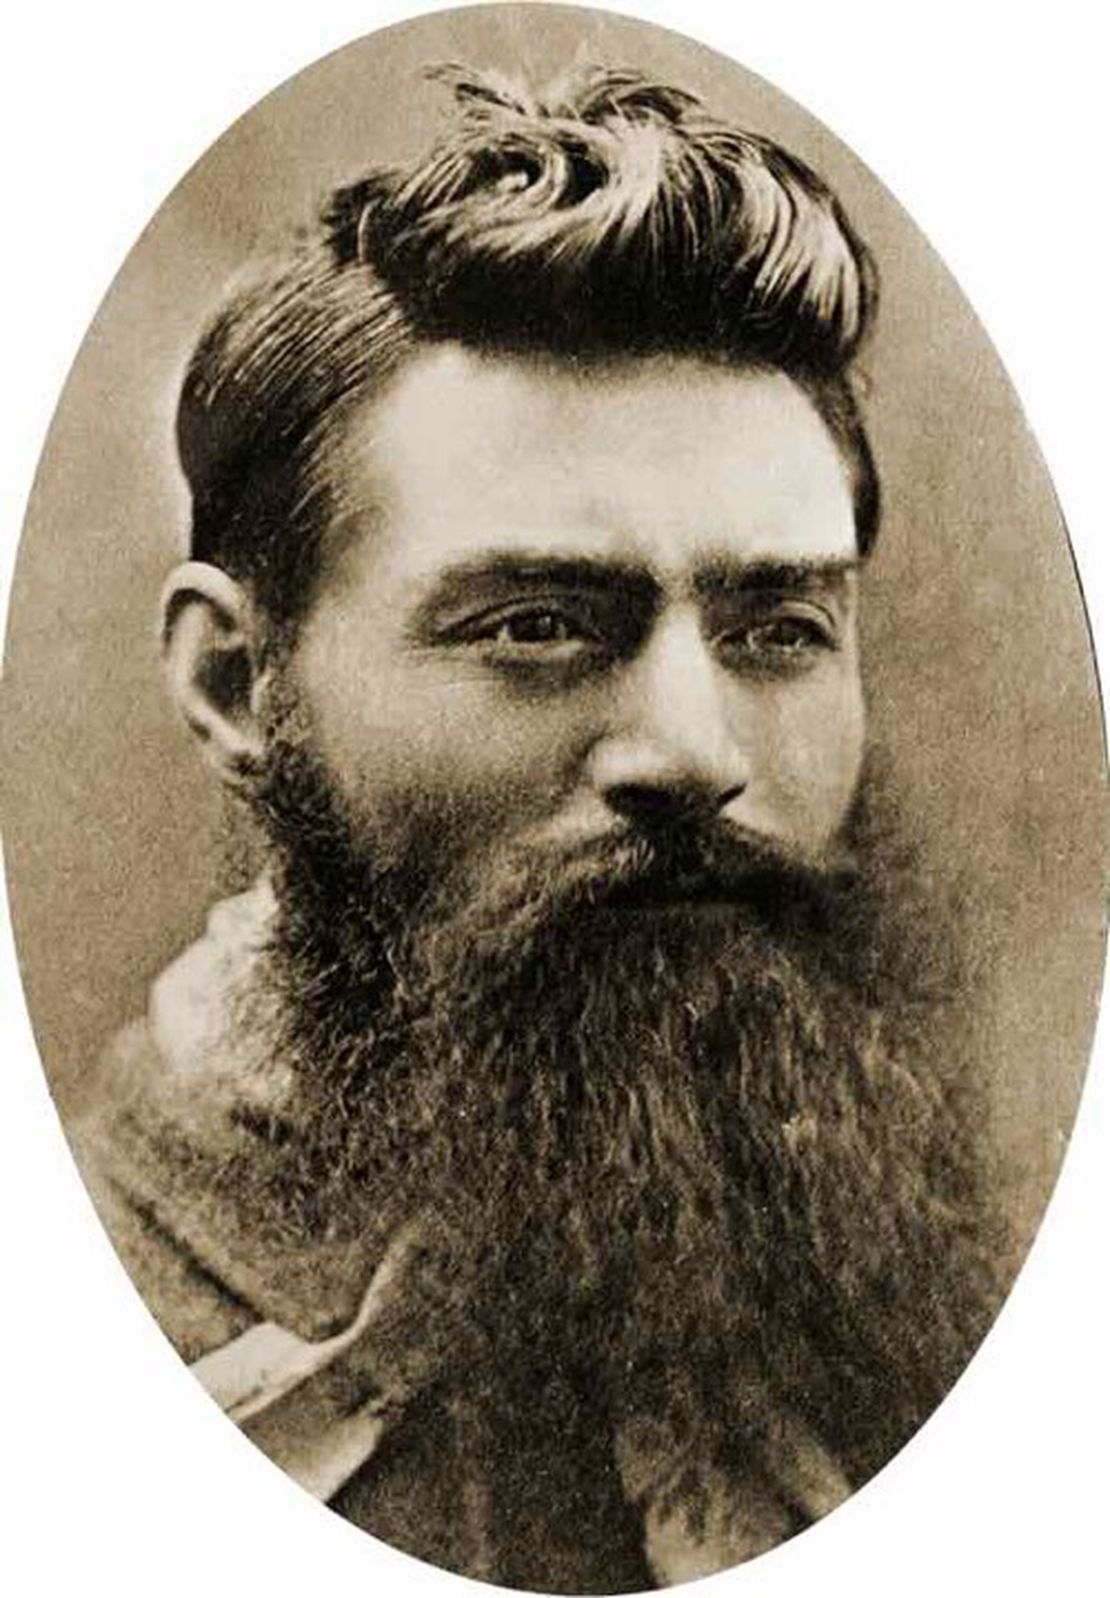 Ned Kelly, Australian bushranger and son of Tipperary transportee, is hanged in Melbourne